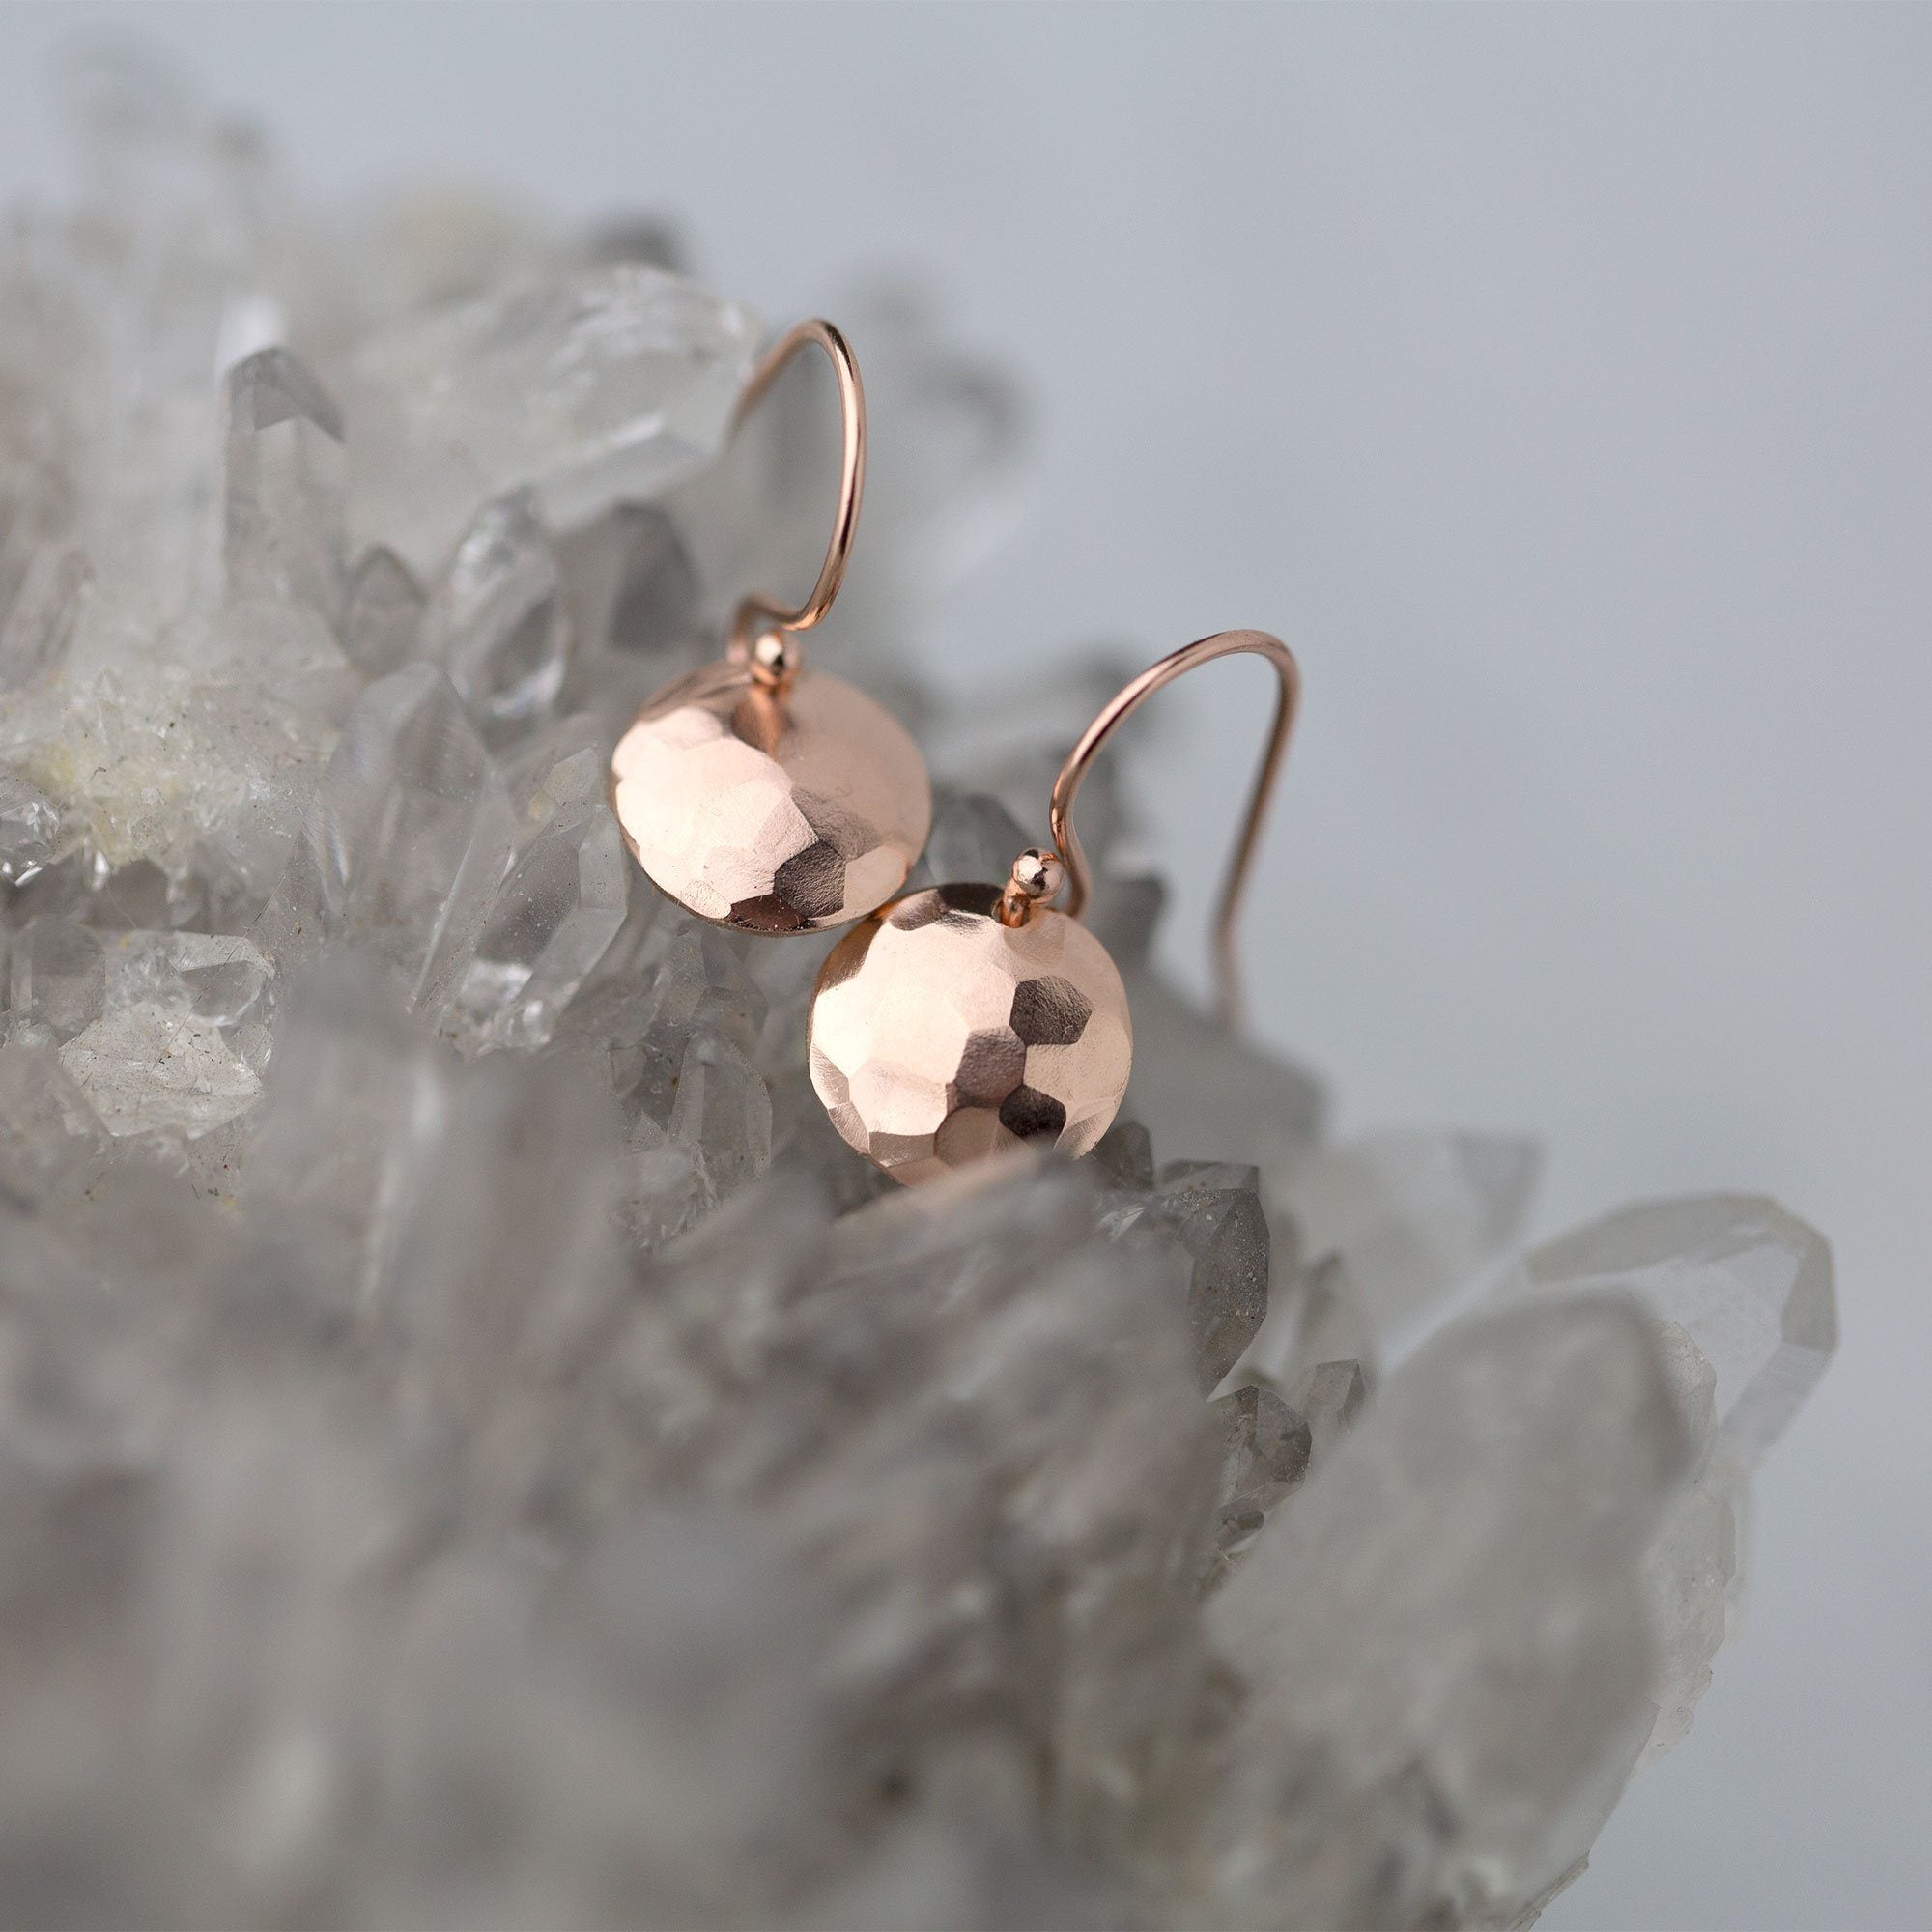 Hammered &amp; Domed Earrings - Rose Gold Fill - Handmade Jewelry by Burnish